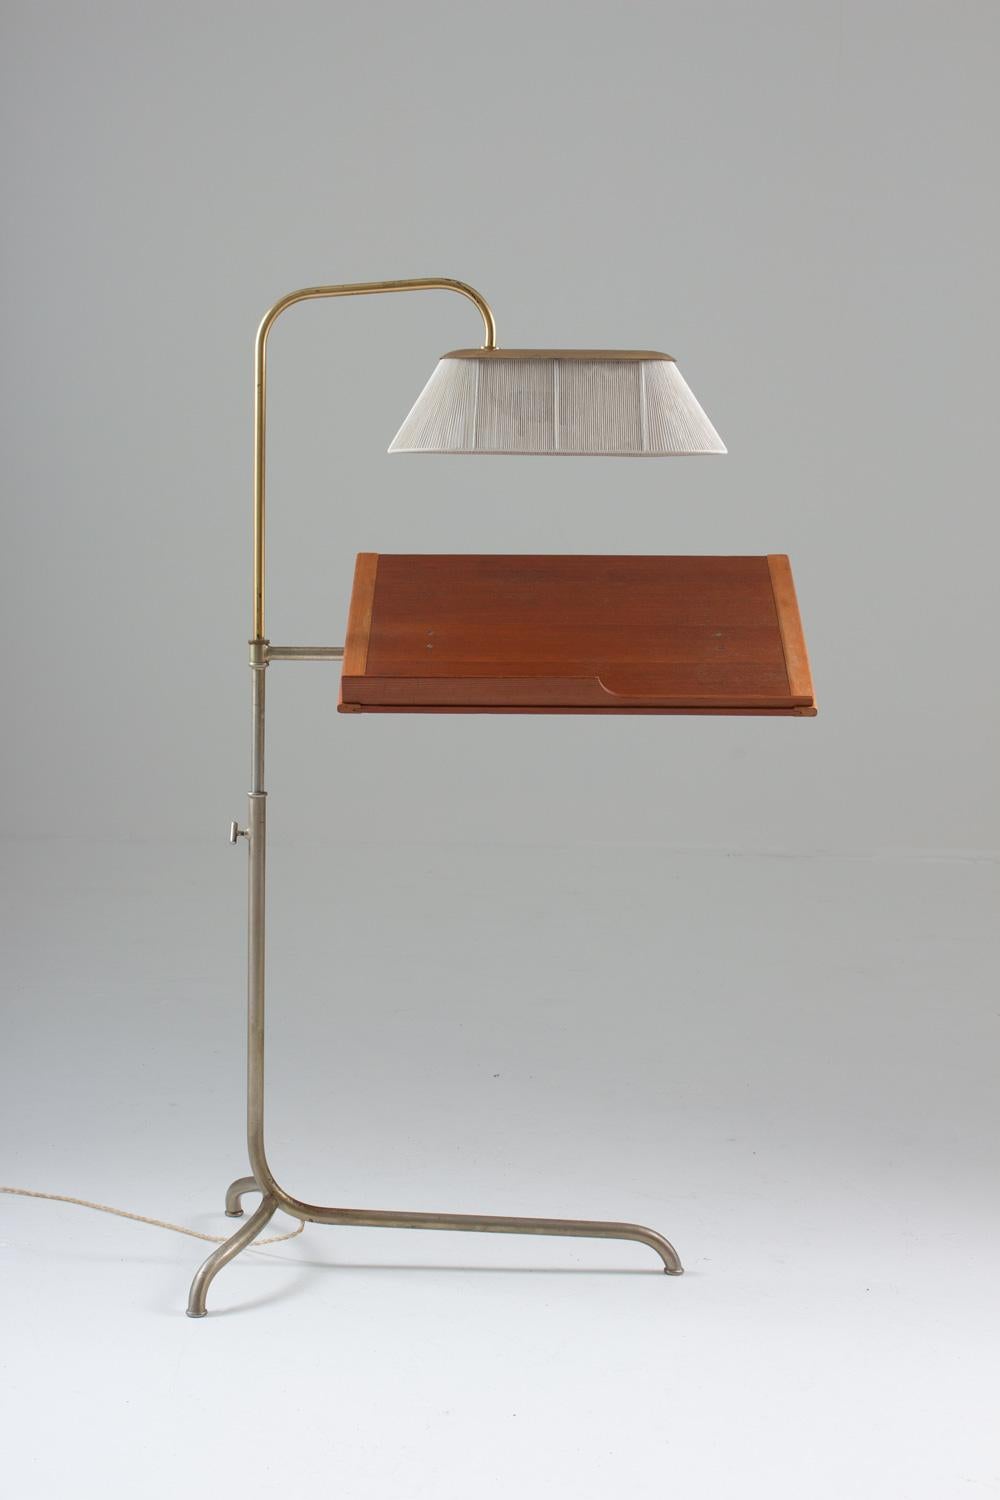 Extremely rare reading stand by Bruno Mathsson, Sweden.
This reading stand is one of very few made. It was probably a special order or made in a very limited edition during the late 1930s or early 1940s. It consists of a metal frame that holds the